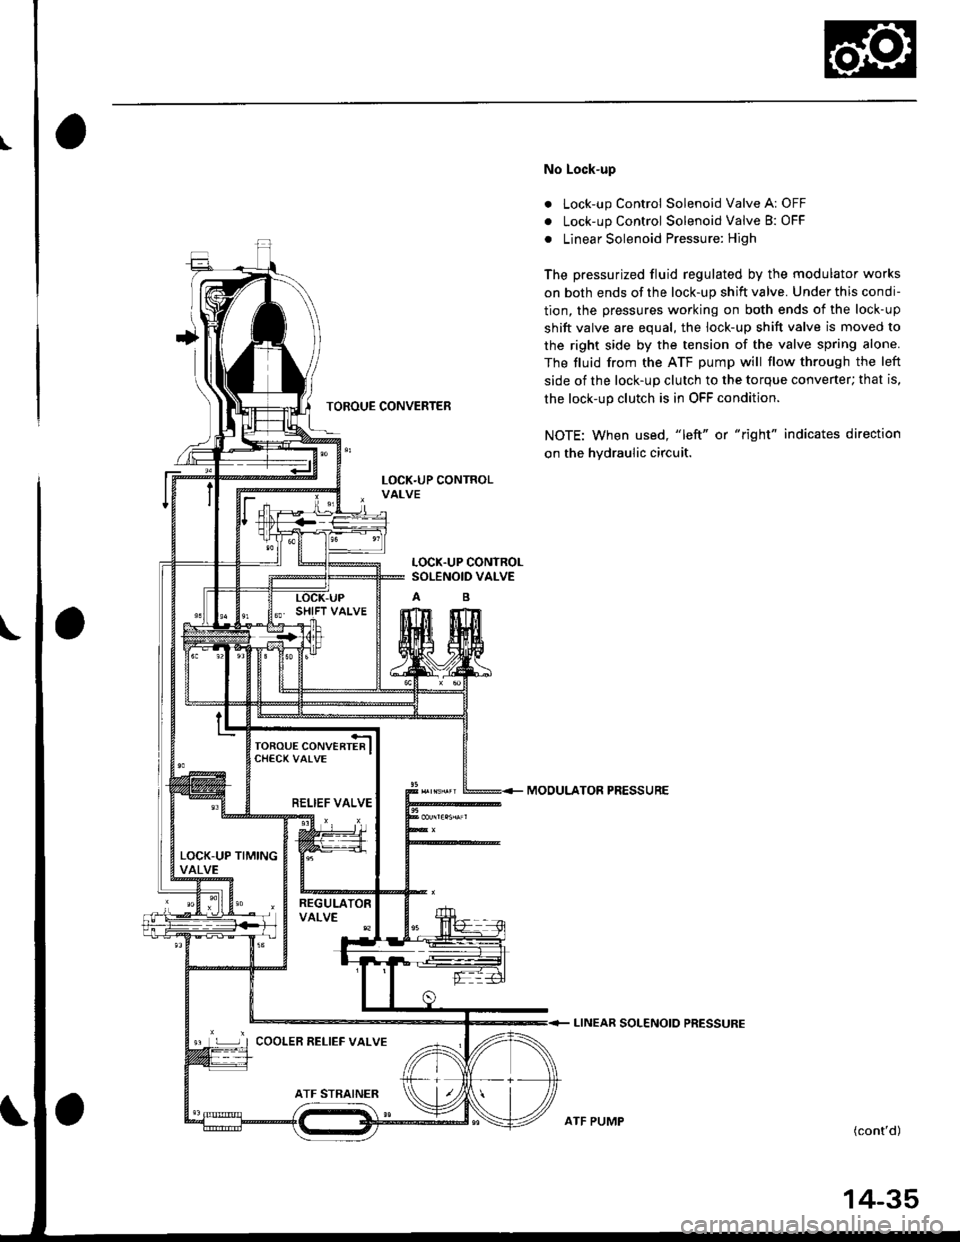 HONDA CIVIC 1997 6.G Service Manual I
TOROUE CONVERTER
No Lock-up
. Lock-up Control Solenoid Valve A: OFF
. Lock-up Control Solenoid Valve B: OFF
. Linear Solenoid Pressure: High
The pressurized fluid regulated by the modulator works
on